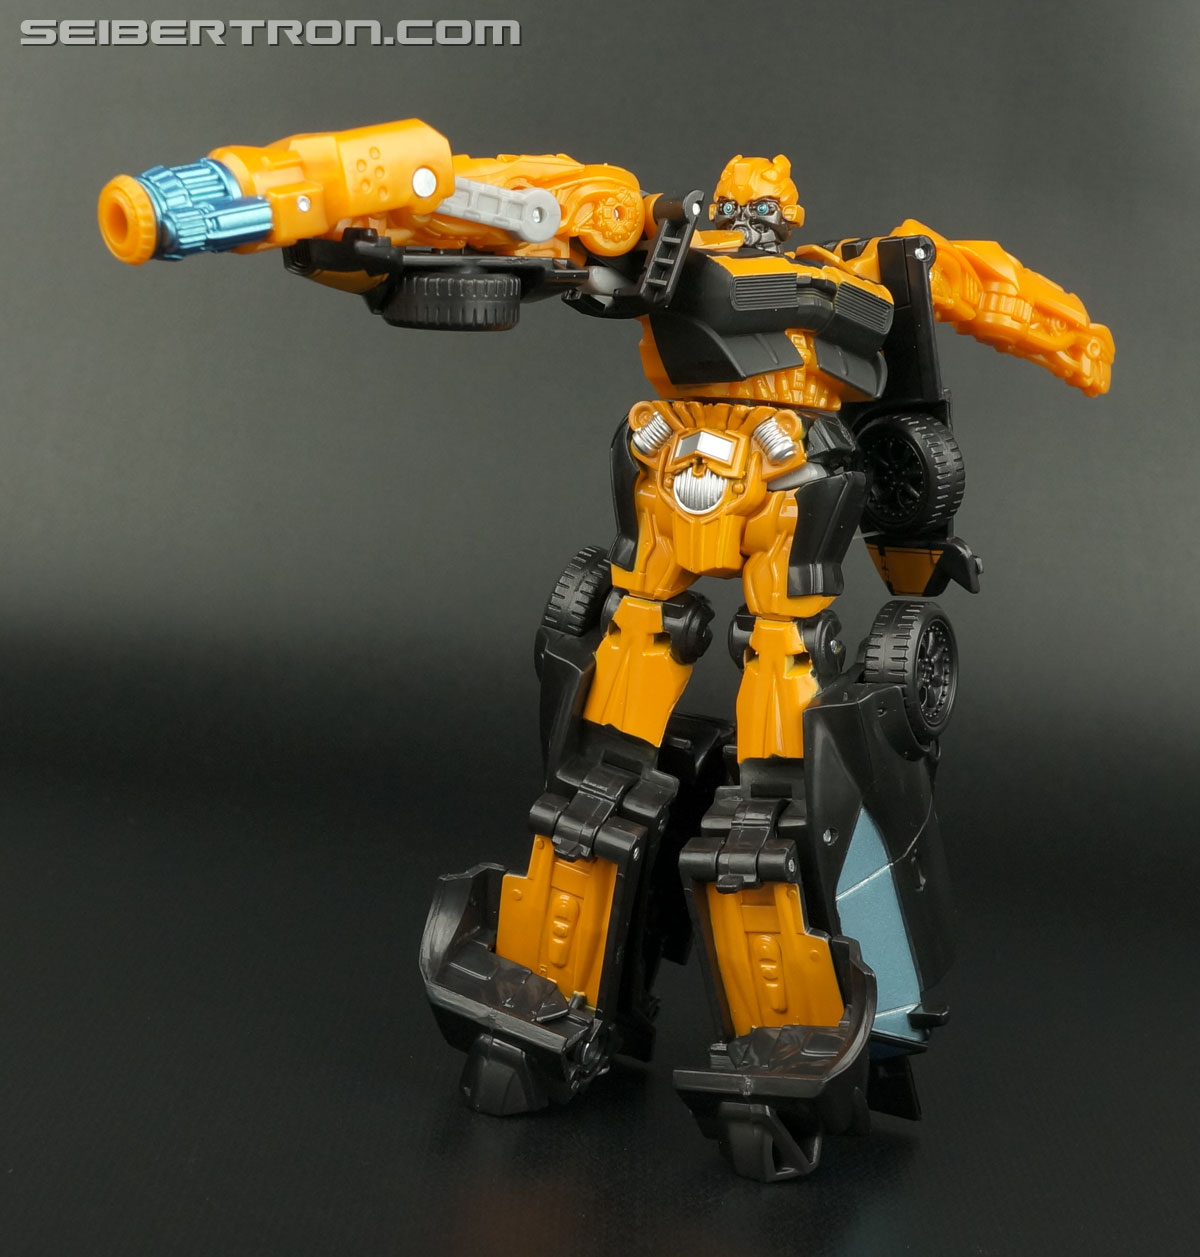 Transformers Age of Extinction: Robots In Disguise High Octane Bumblebee (Image #77 of 98)